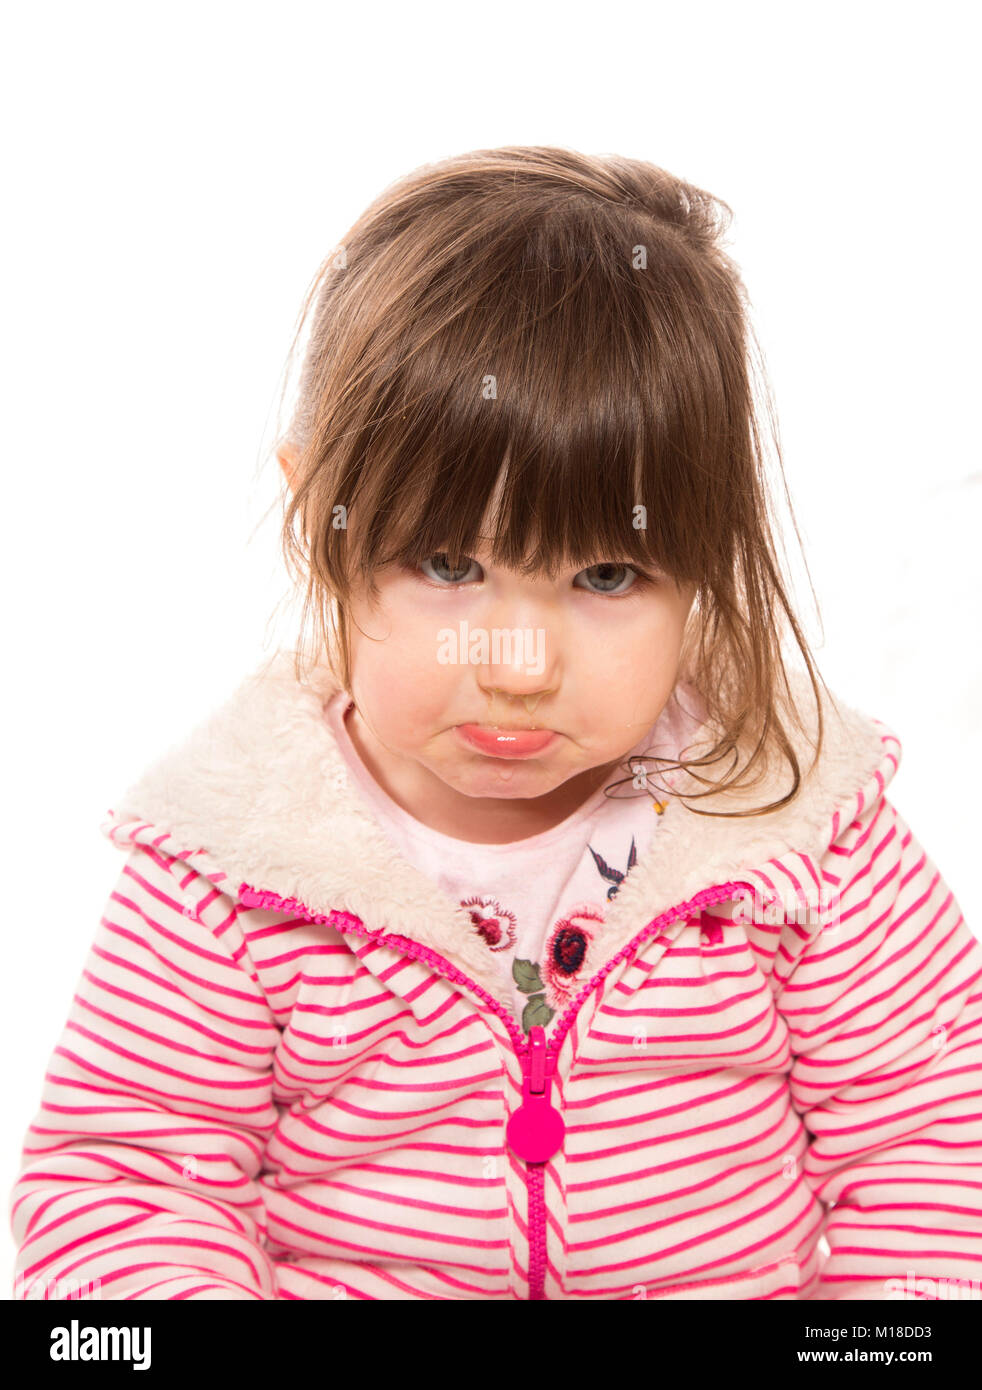 toddler with a cold and full of snot Stock Photo